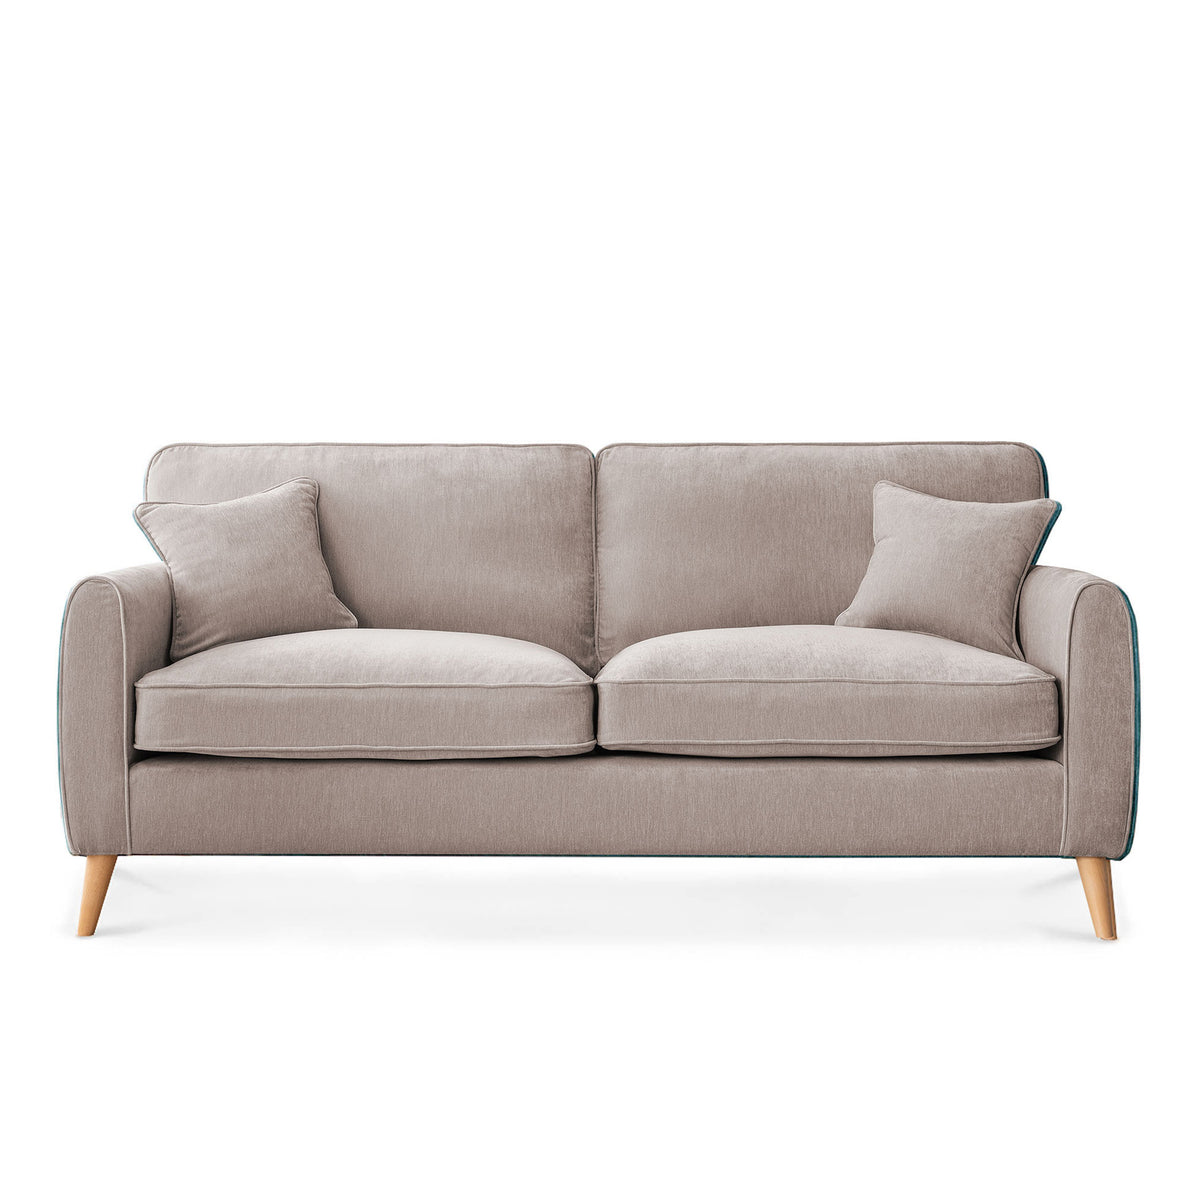 Comfy Ada Chenille 4 Seater Sofa | Modern Grey Green Gold Blue & Pink  Living Room Settee | Upholstered Fabric Large Lounge Couch Roseland  Furniture